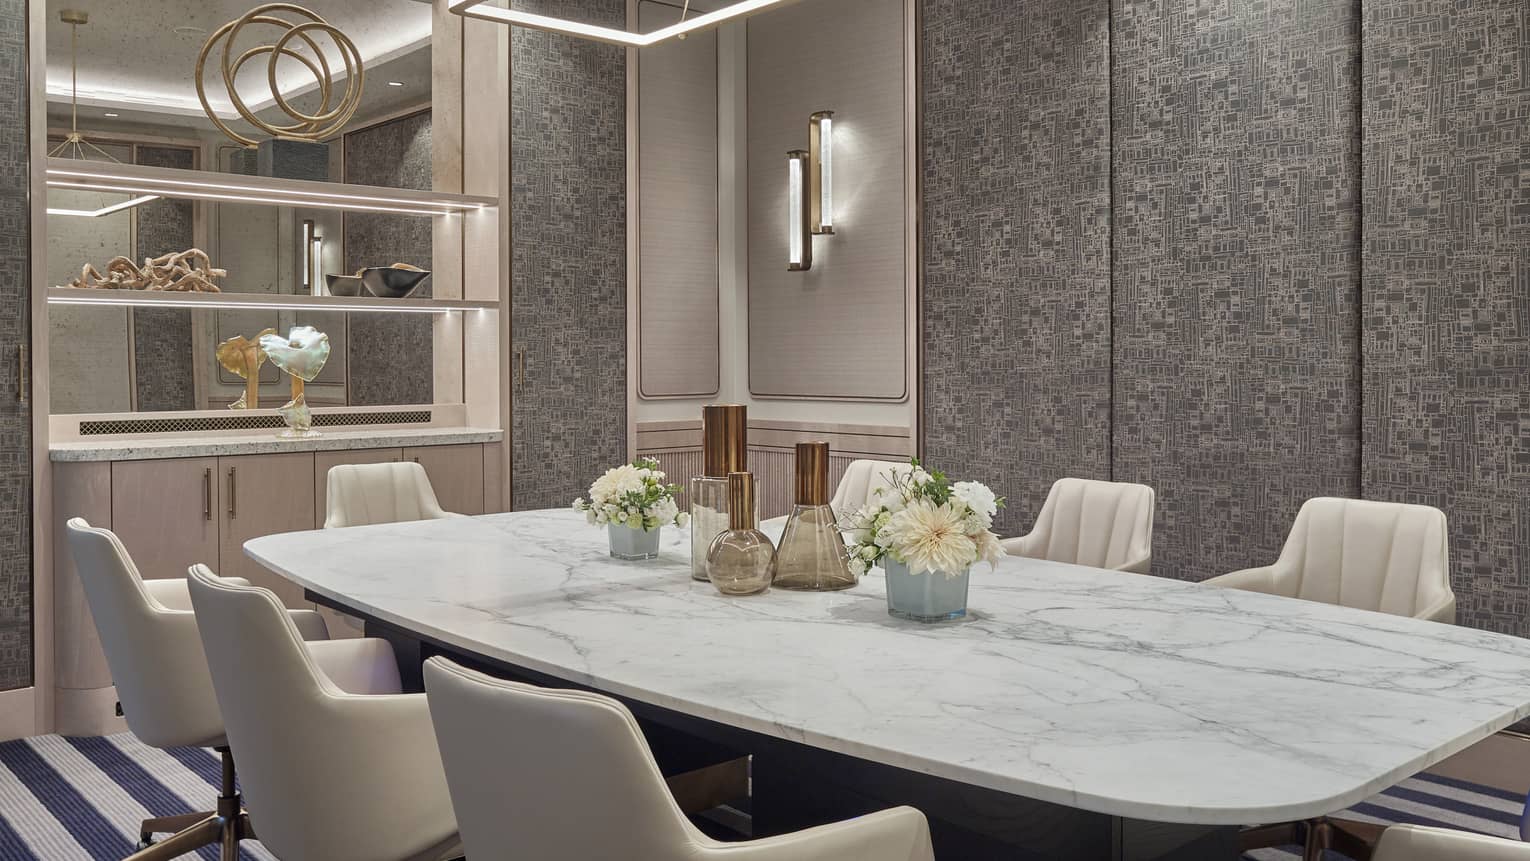 Turay room with marbled conference table, seven white leather chairs, mirrored armoire